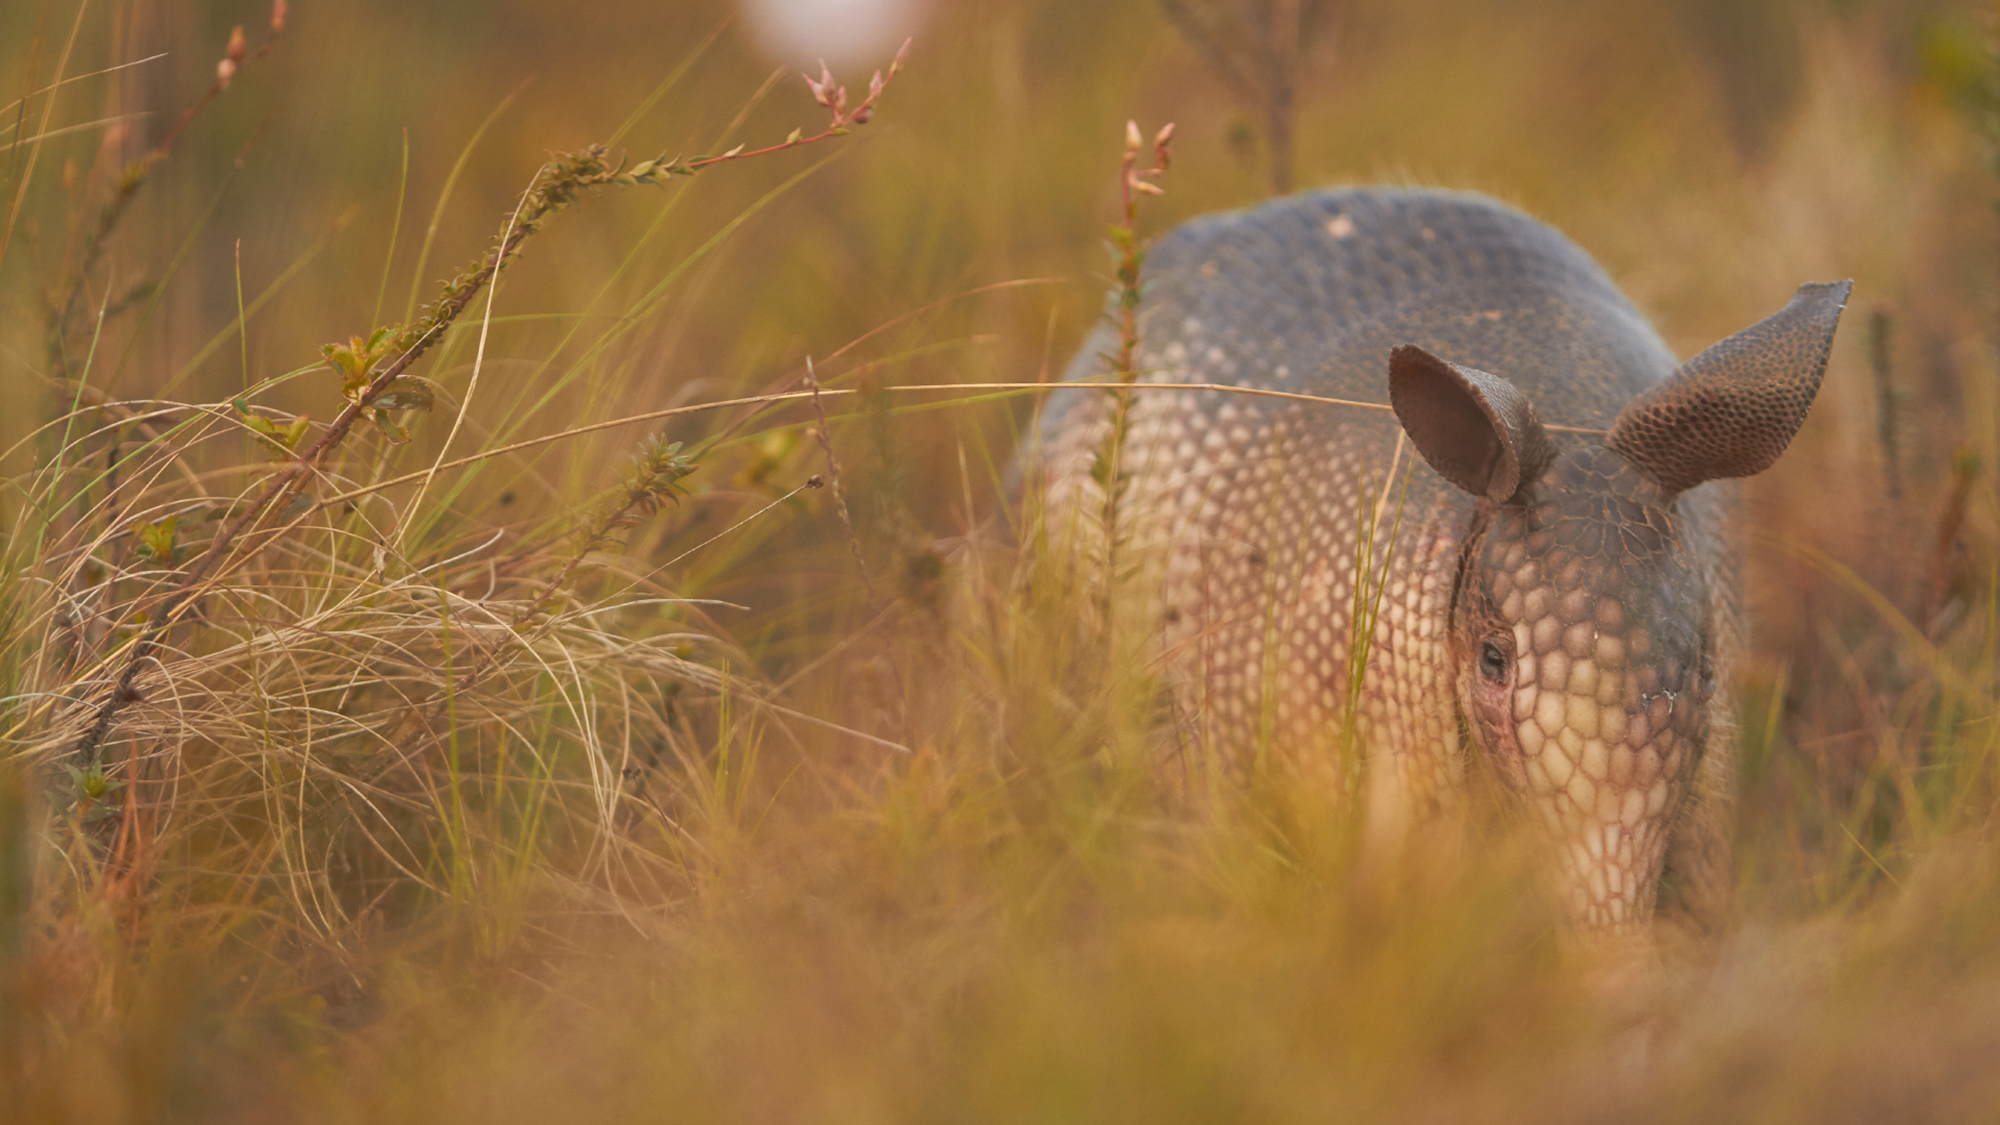 A new species of armadillo was hidden from view